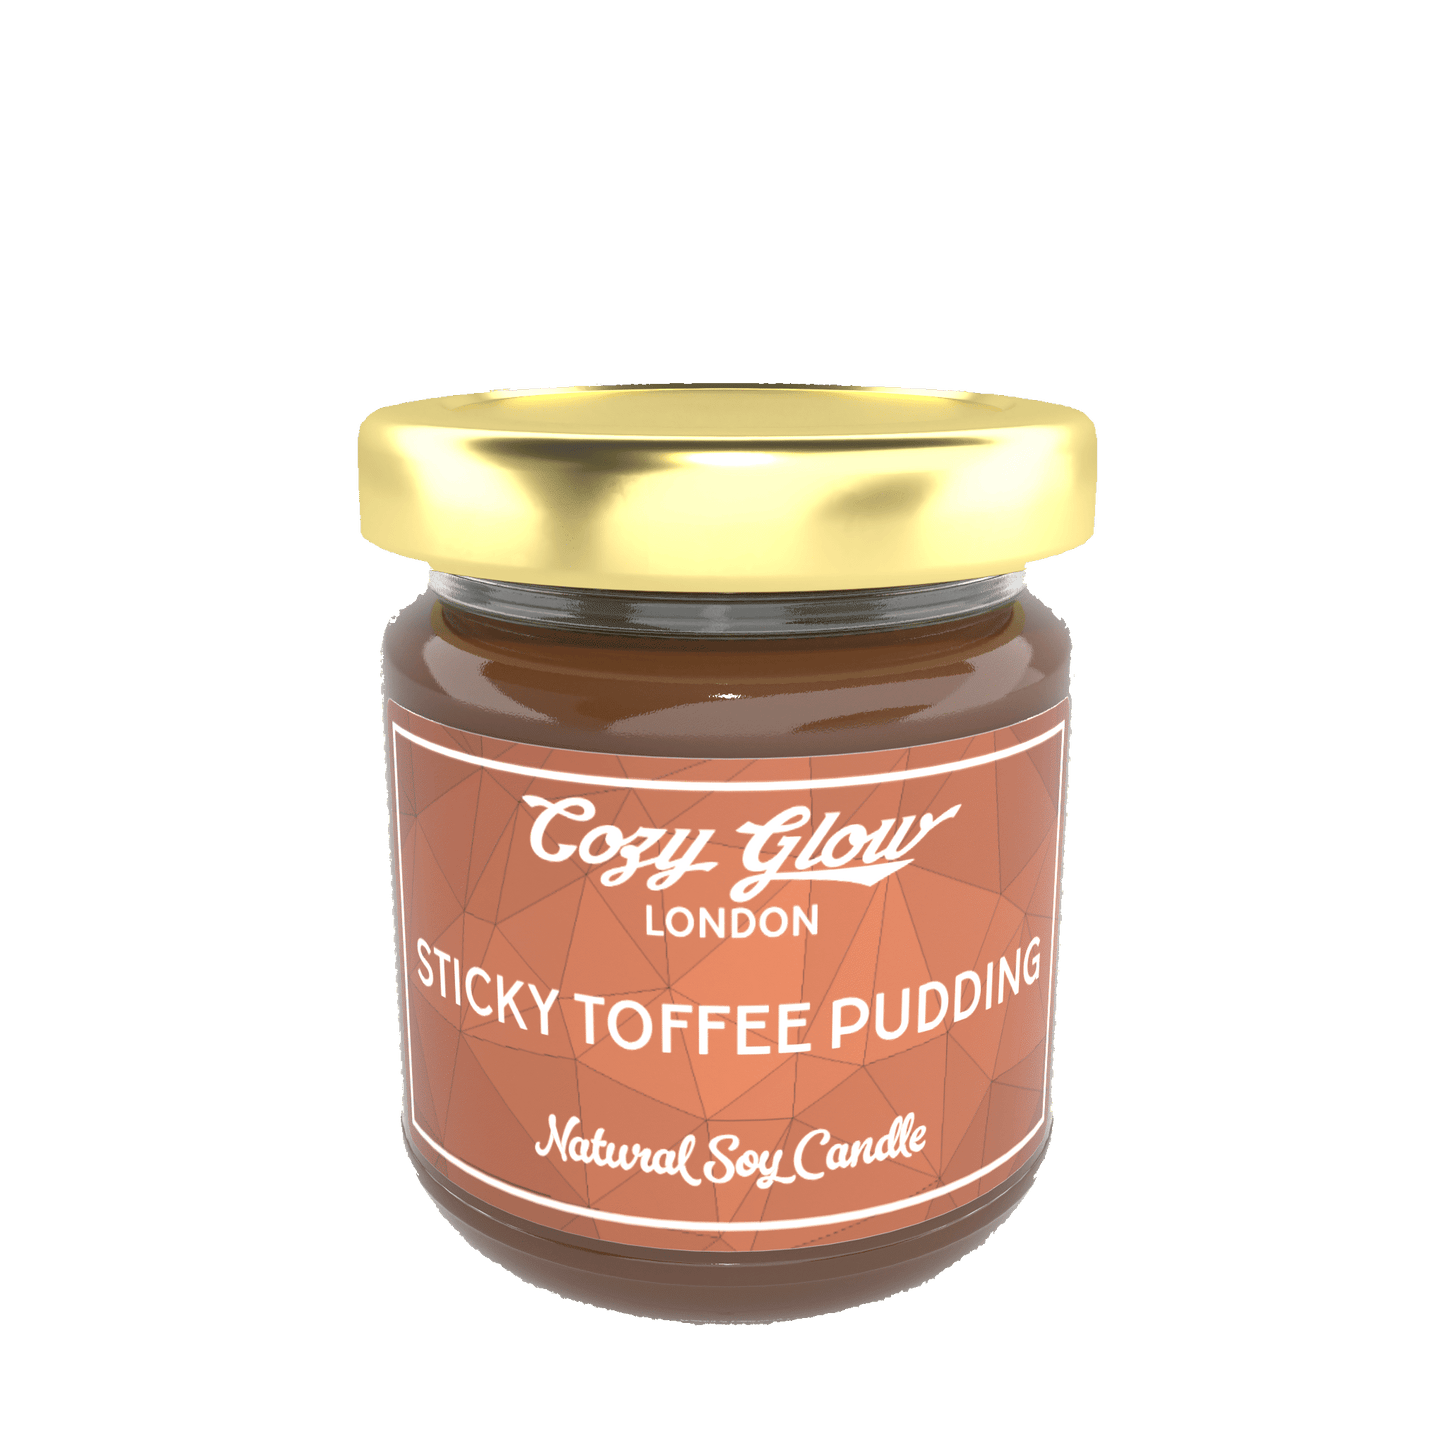 Cozy Glow Sticky Toffee Pudding Regular Soy Candle